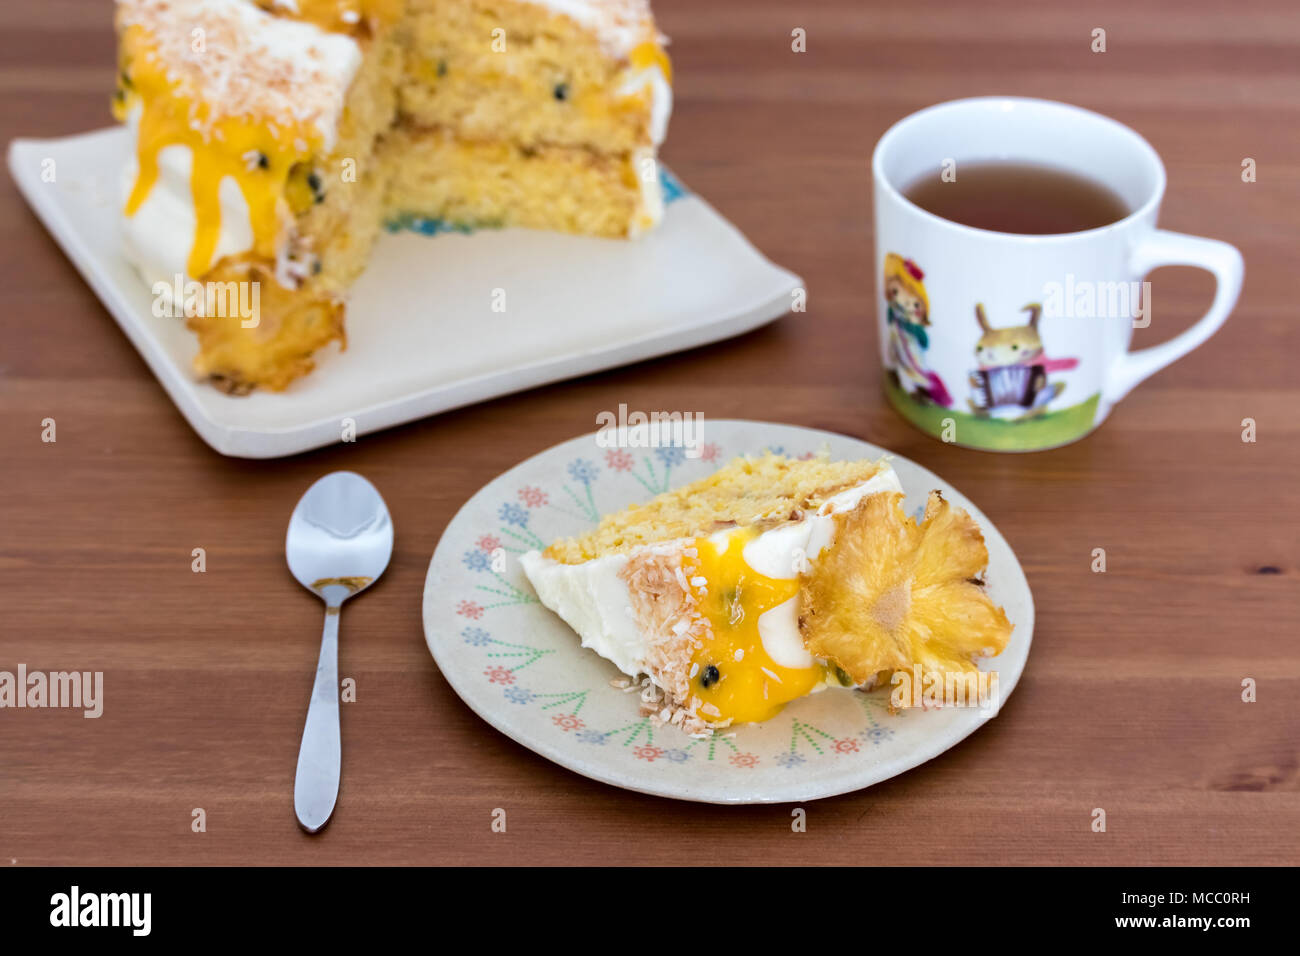 A slice of pineapple and coconut cake with passion fruit curd, served on handmade plate with black tea. Stock Photo